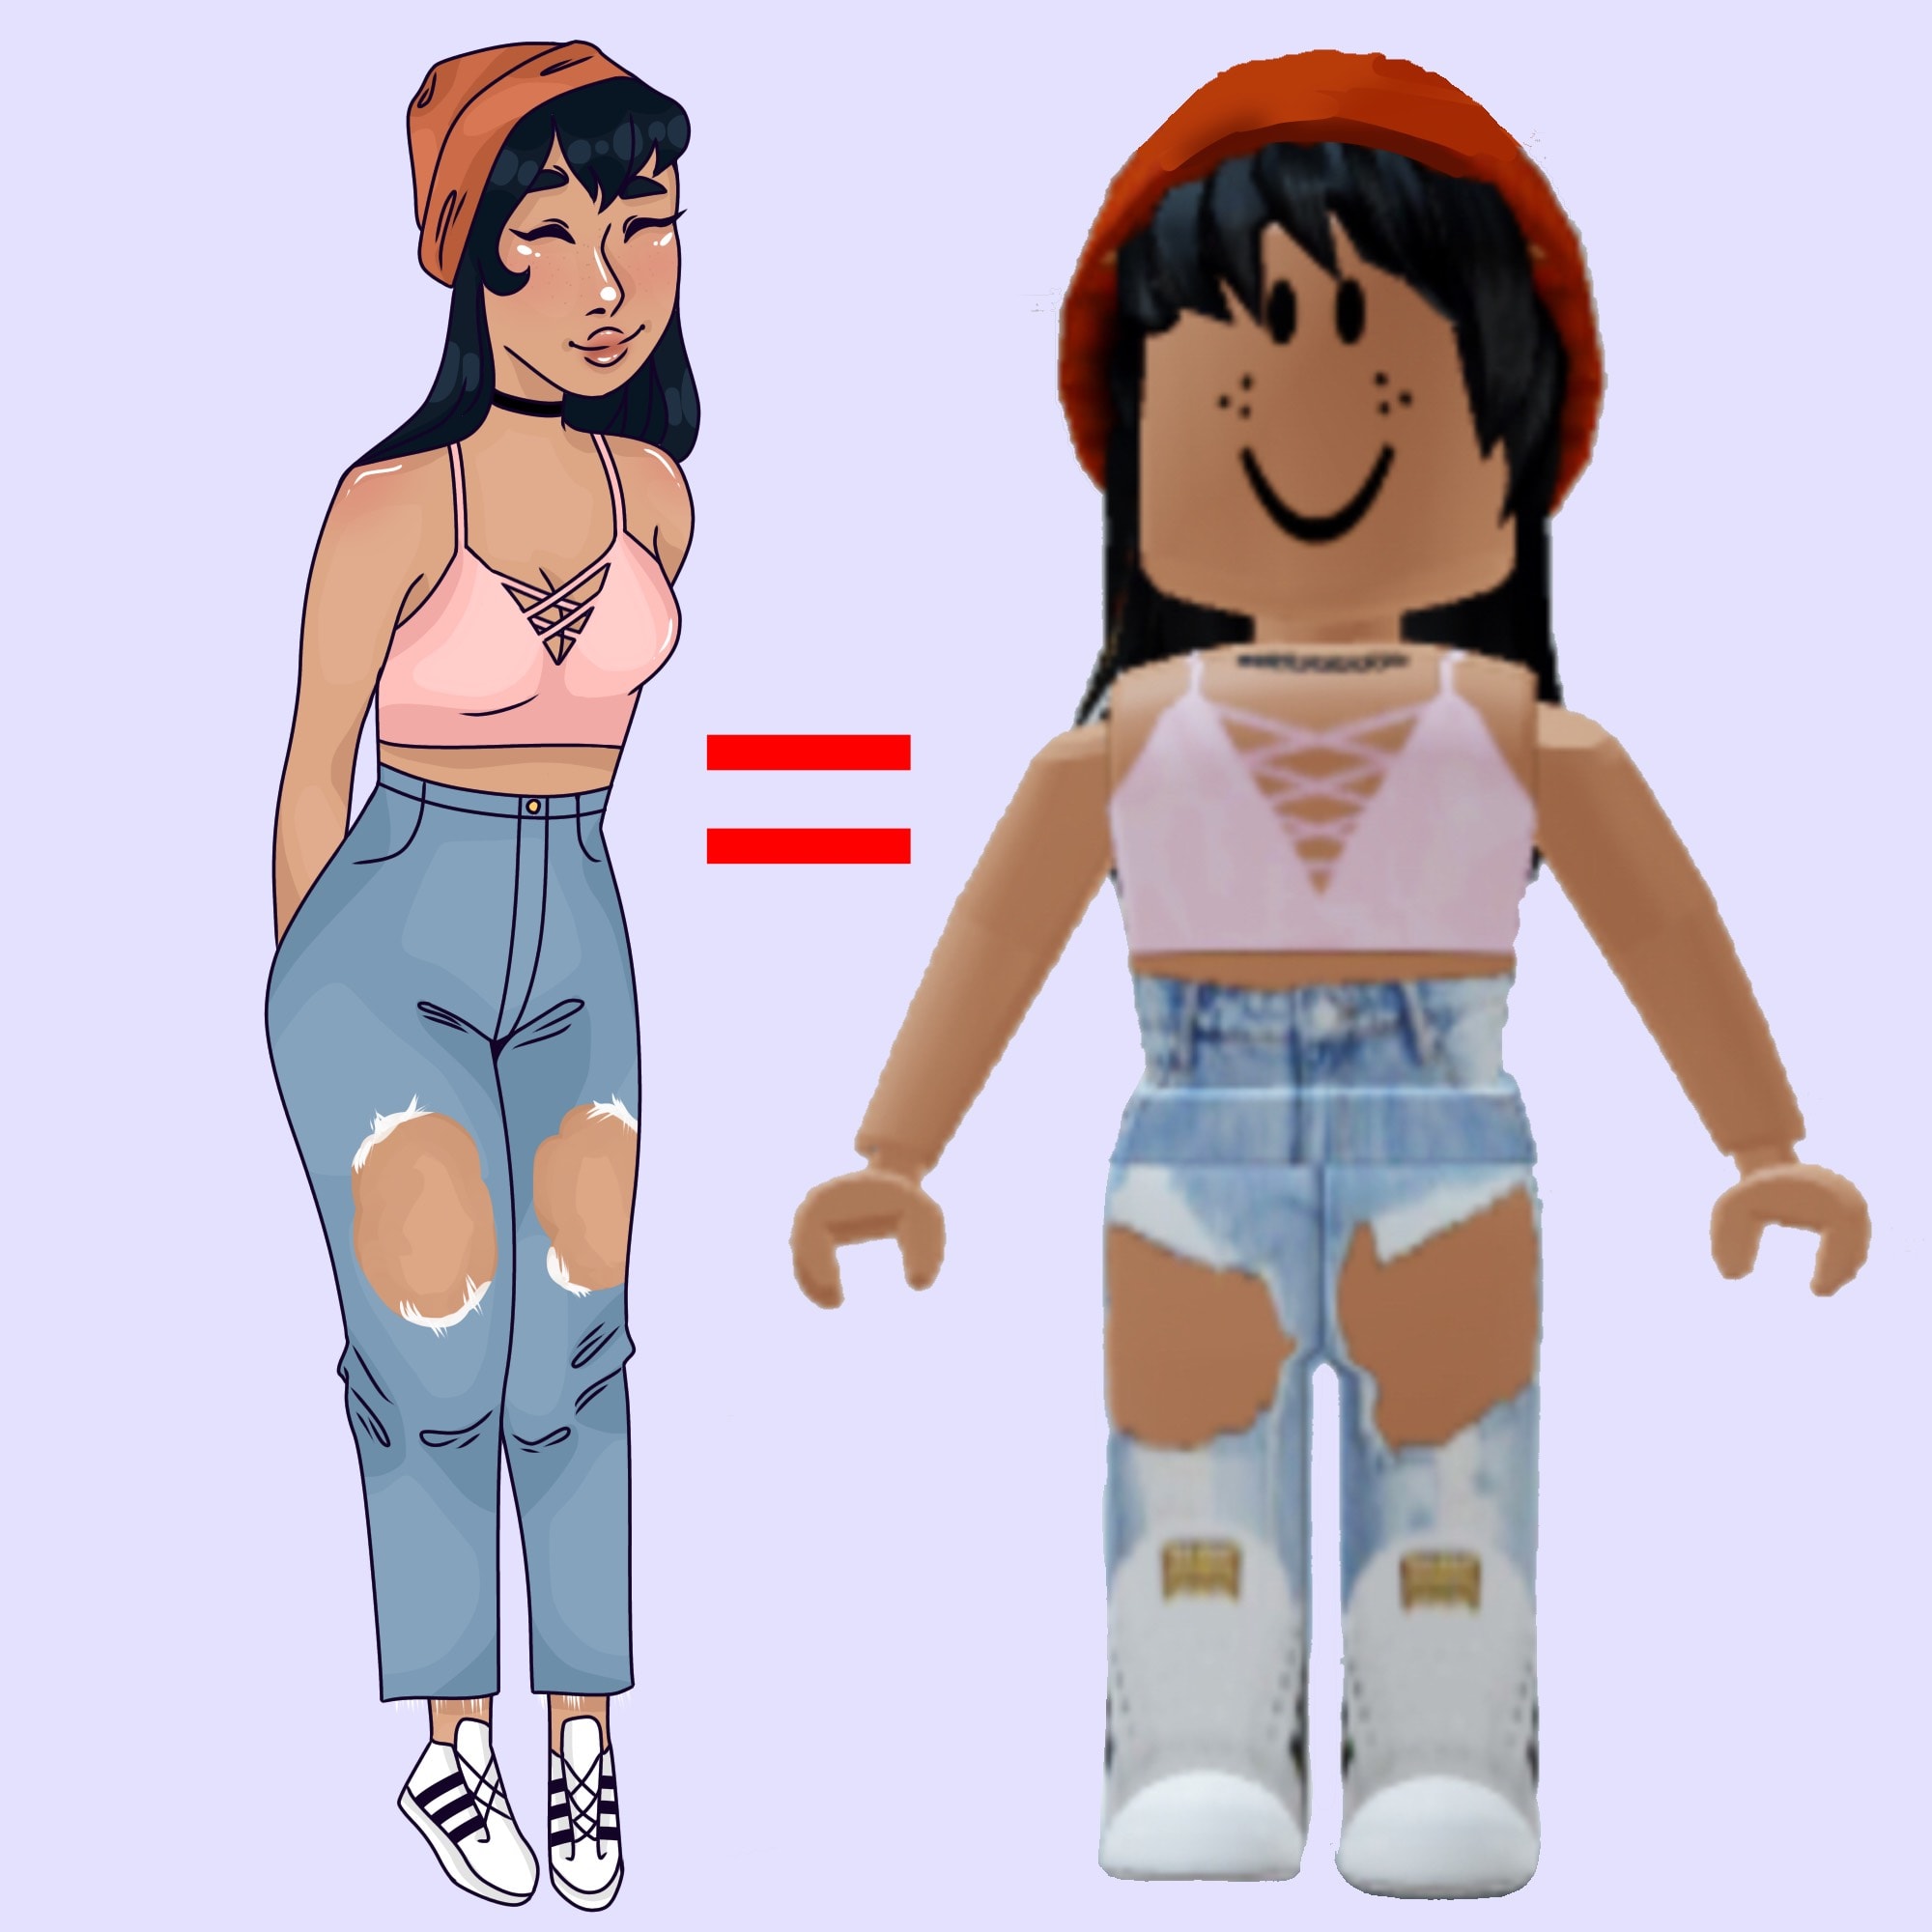 Draw Your Roblox Character In My Style By Natuillustrates Fiverr - roblox character images